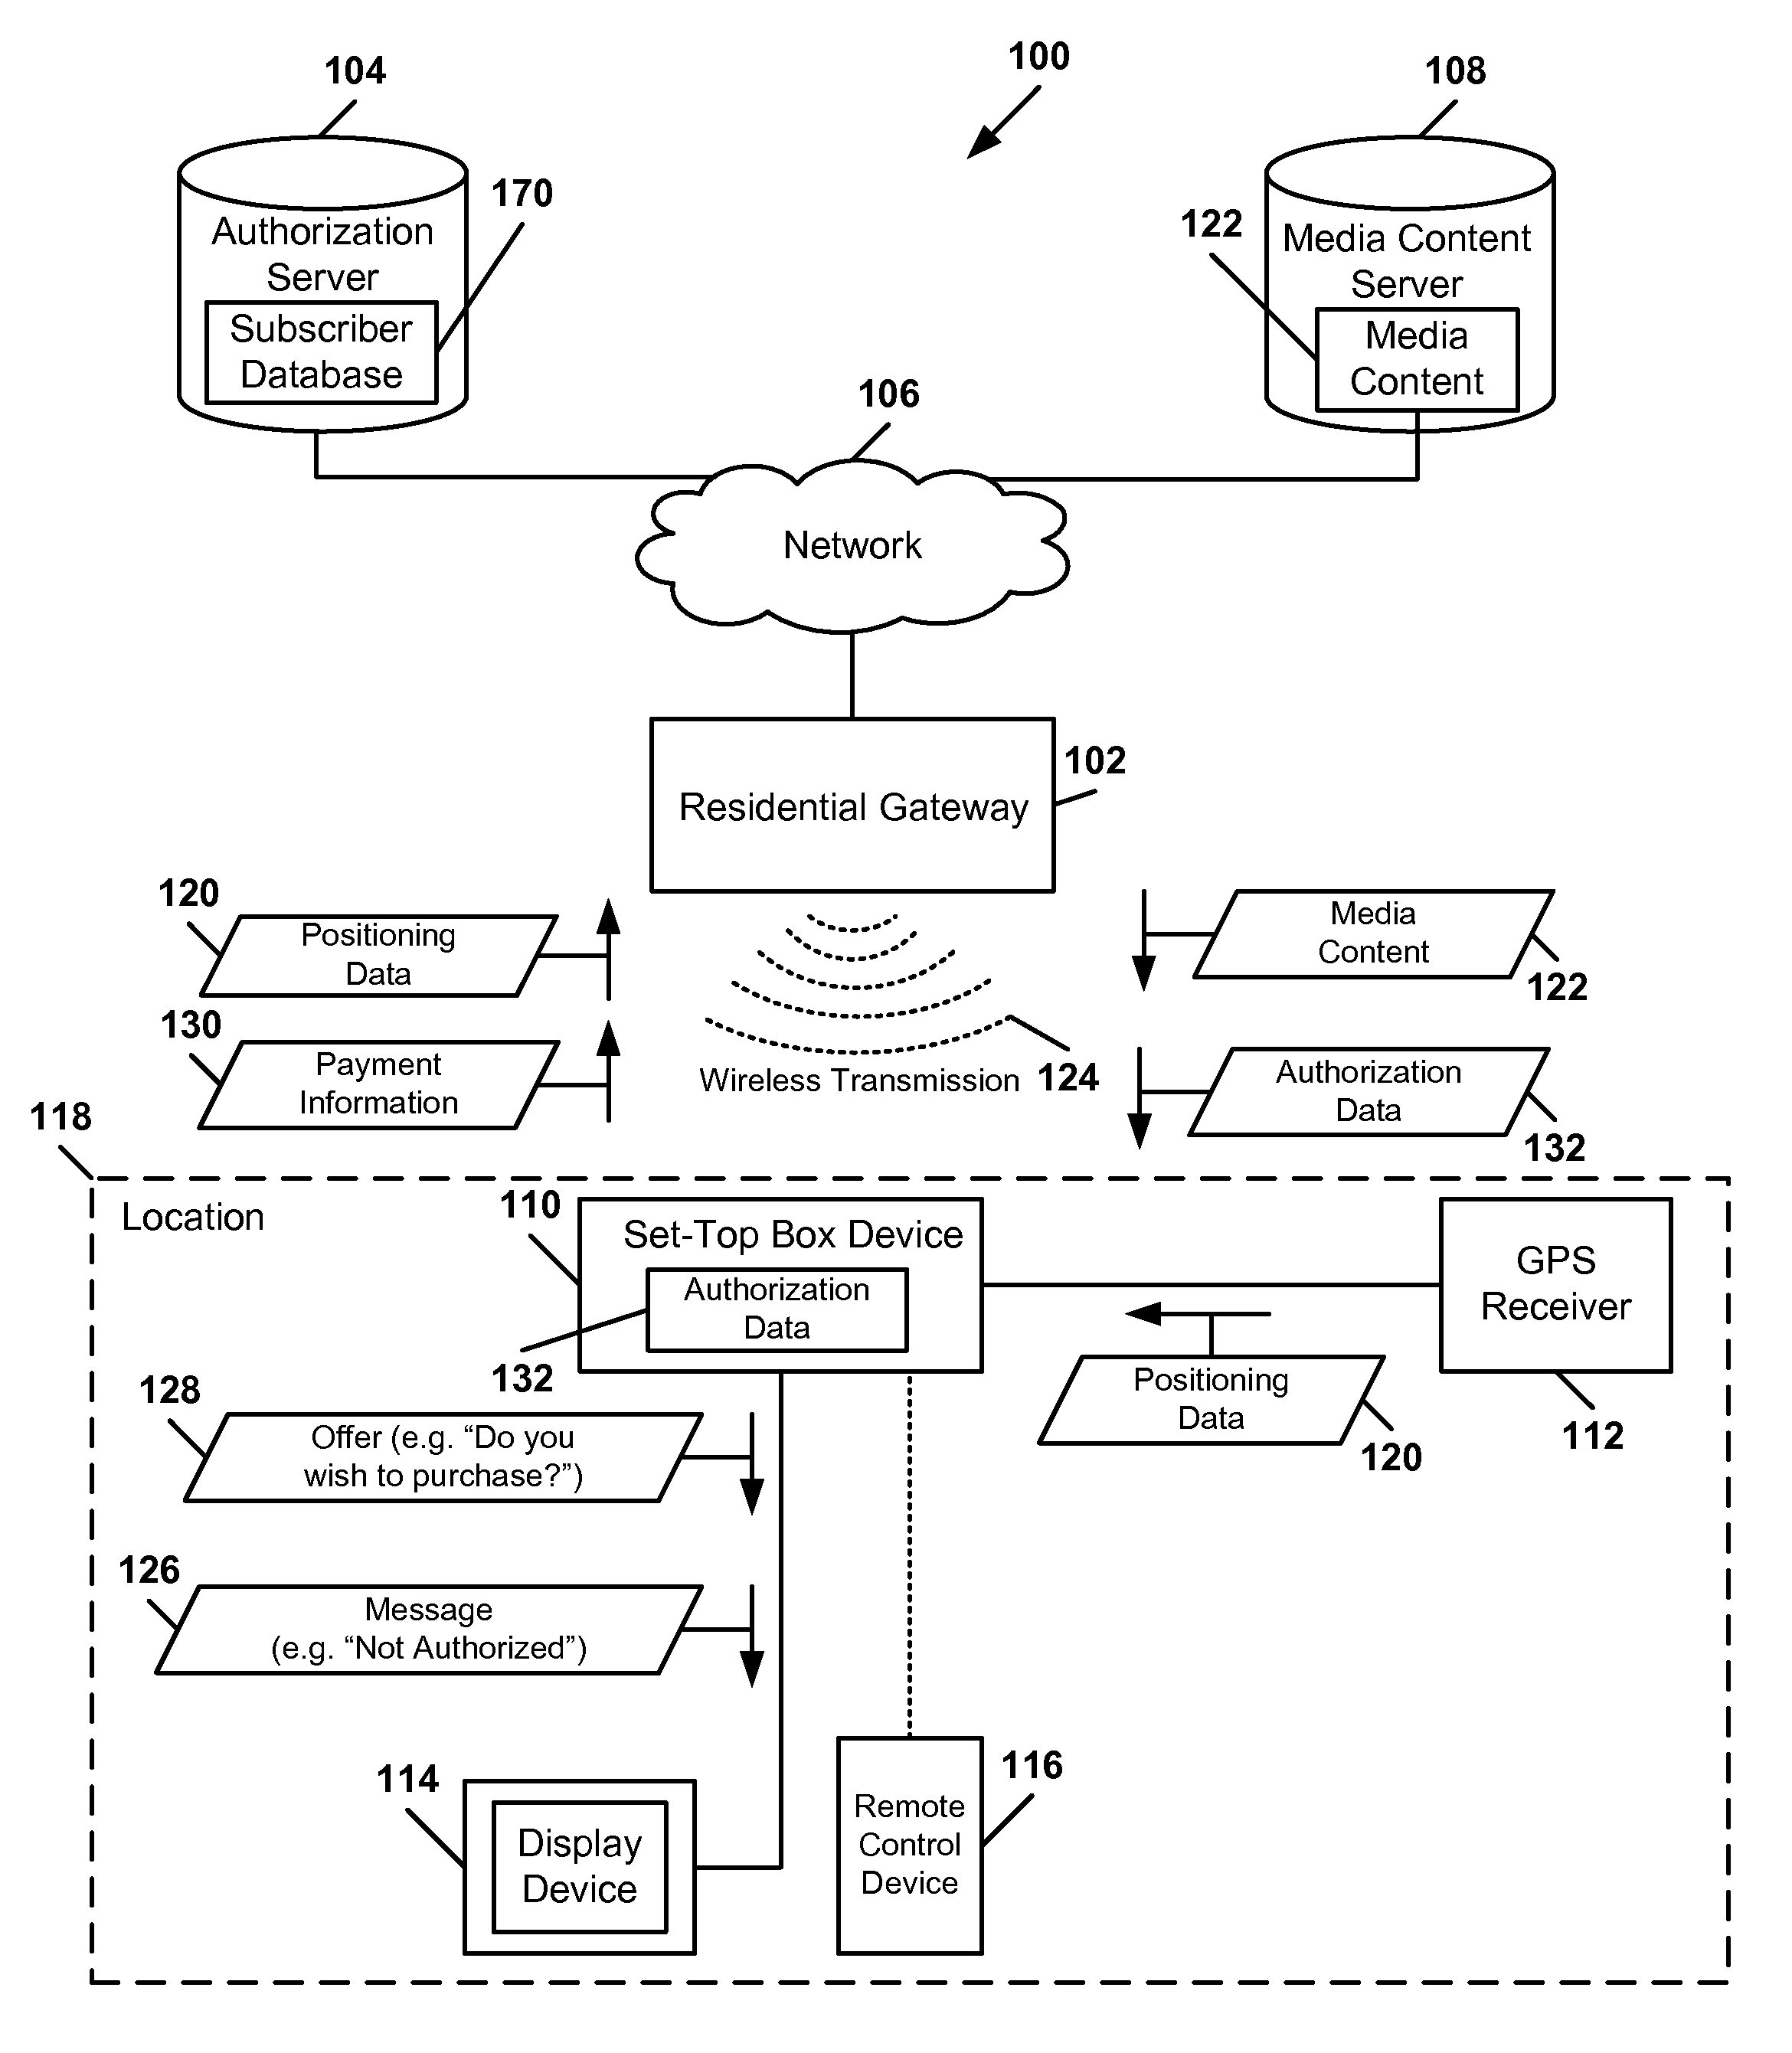 System and Method to Determine an Authorization of a Wireless Set-Top Box Device to Receive Media Content